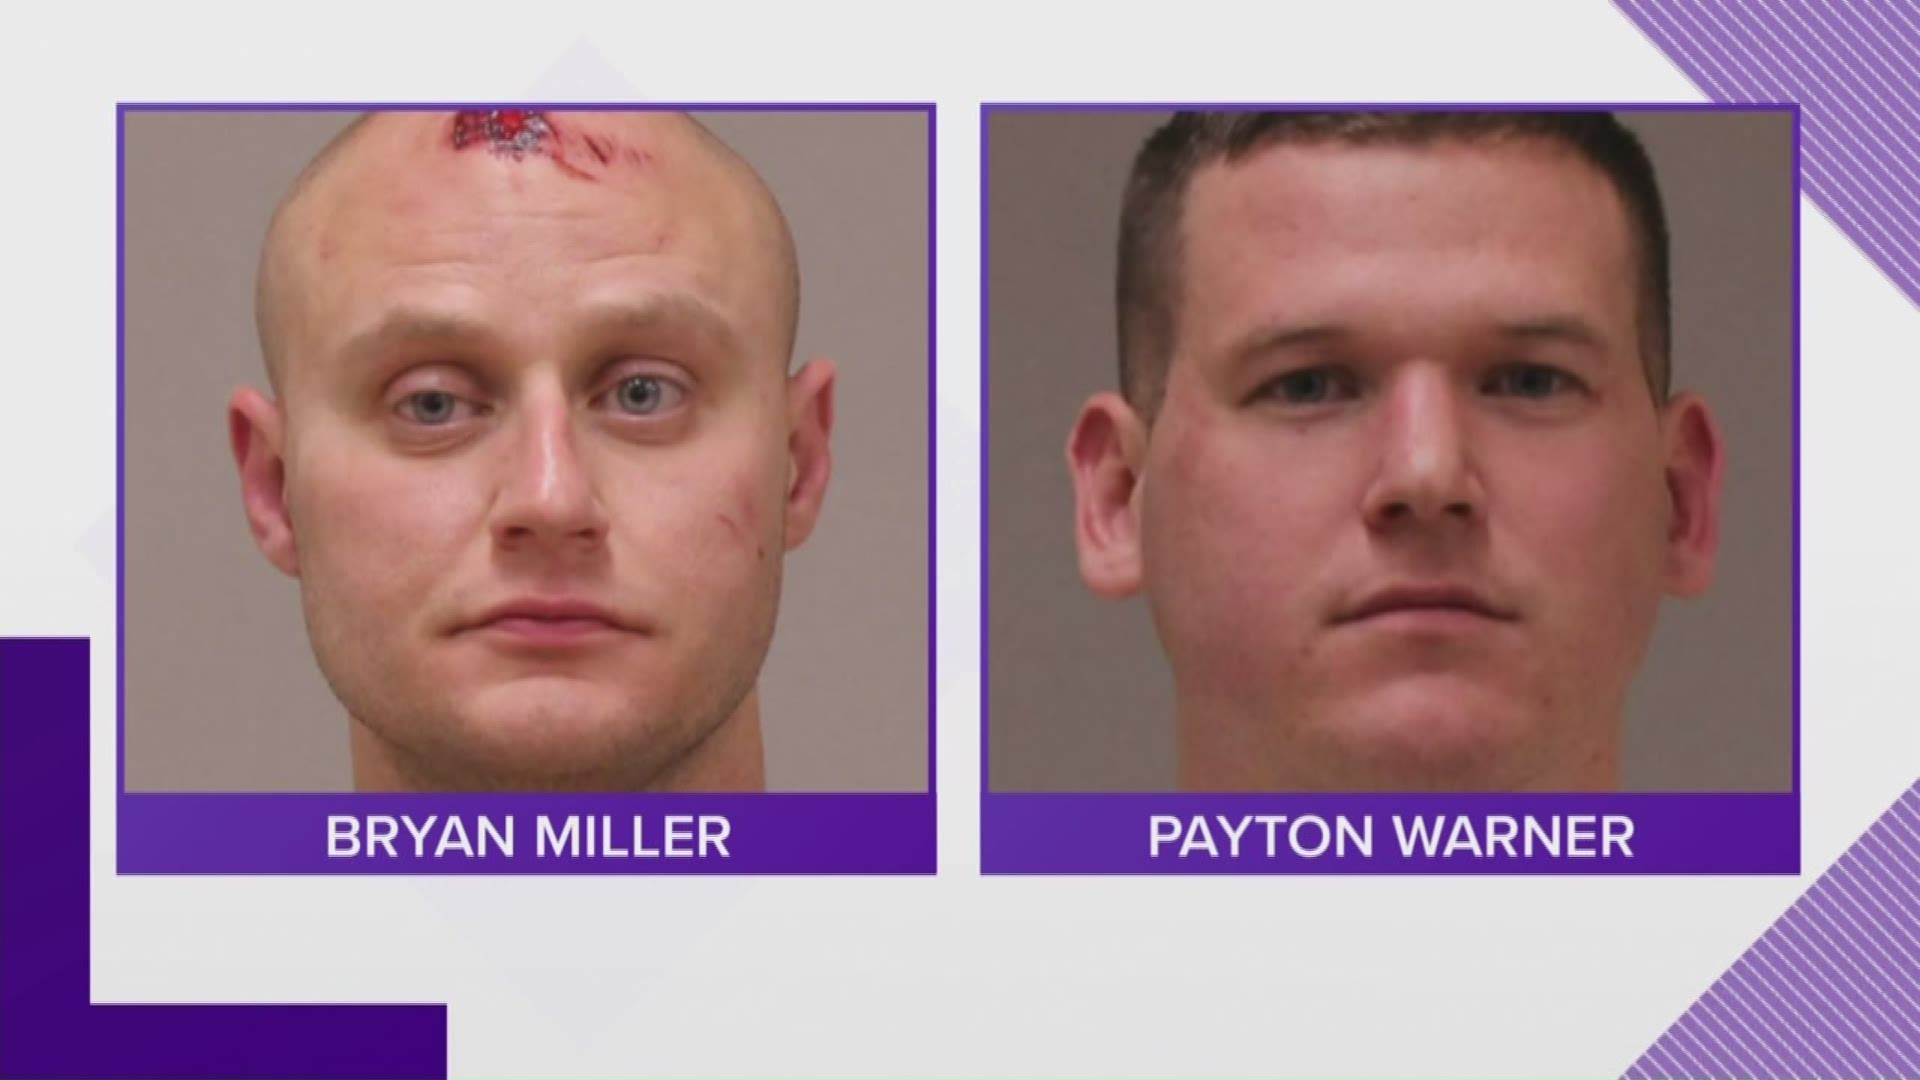 Both officers pleaded no contest to misdemeanor charges connected to an off-duty bar fight in Grand Rapids.